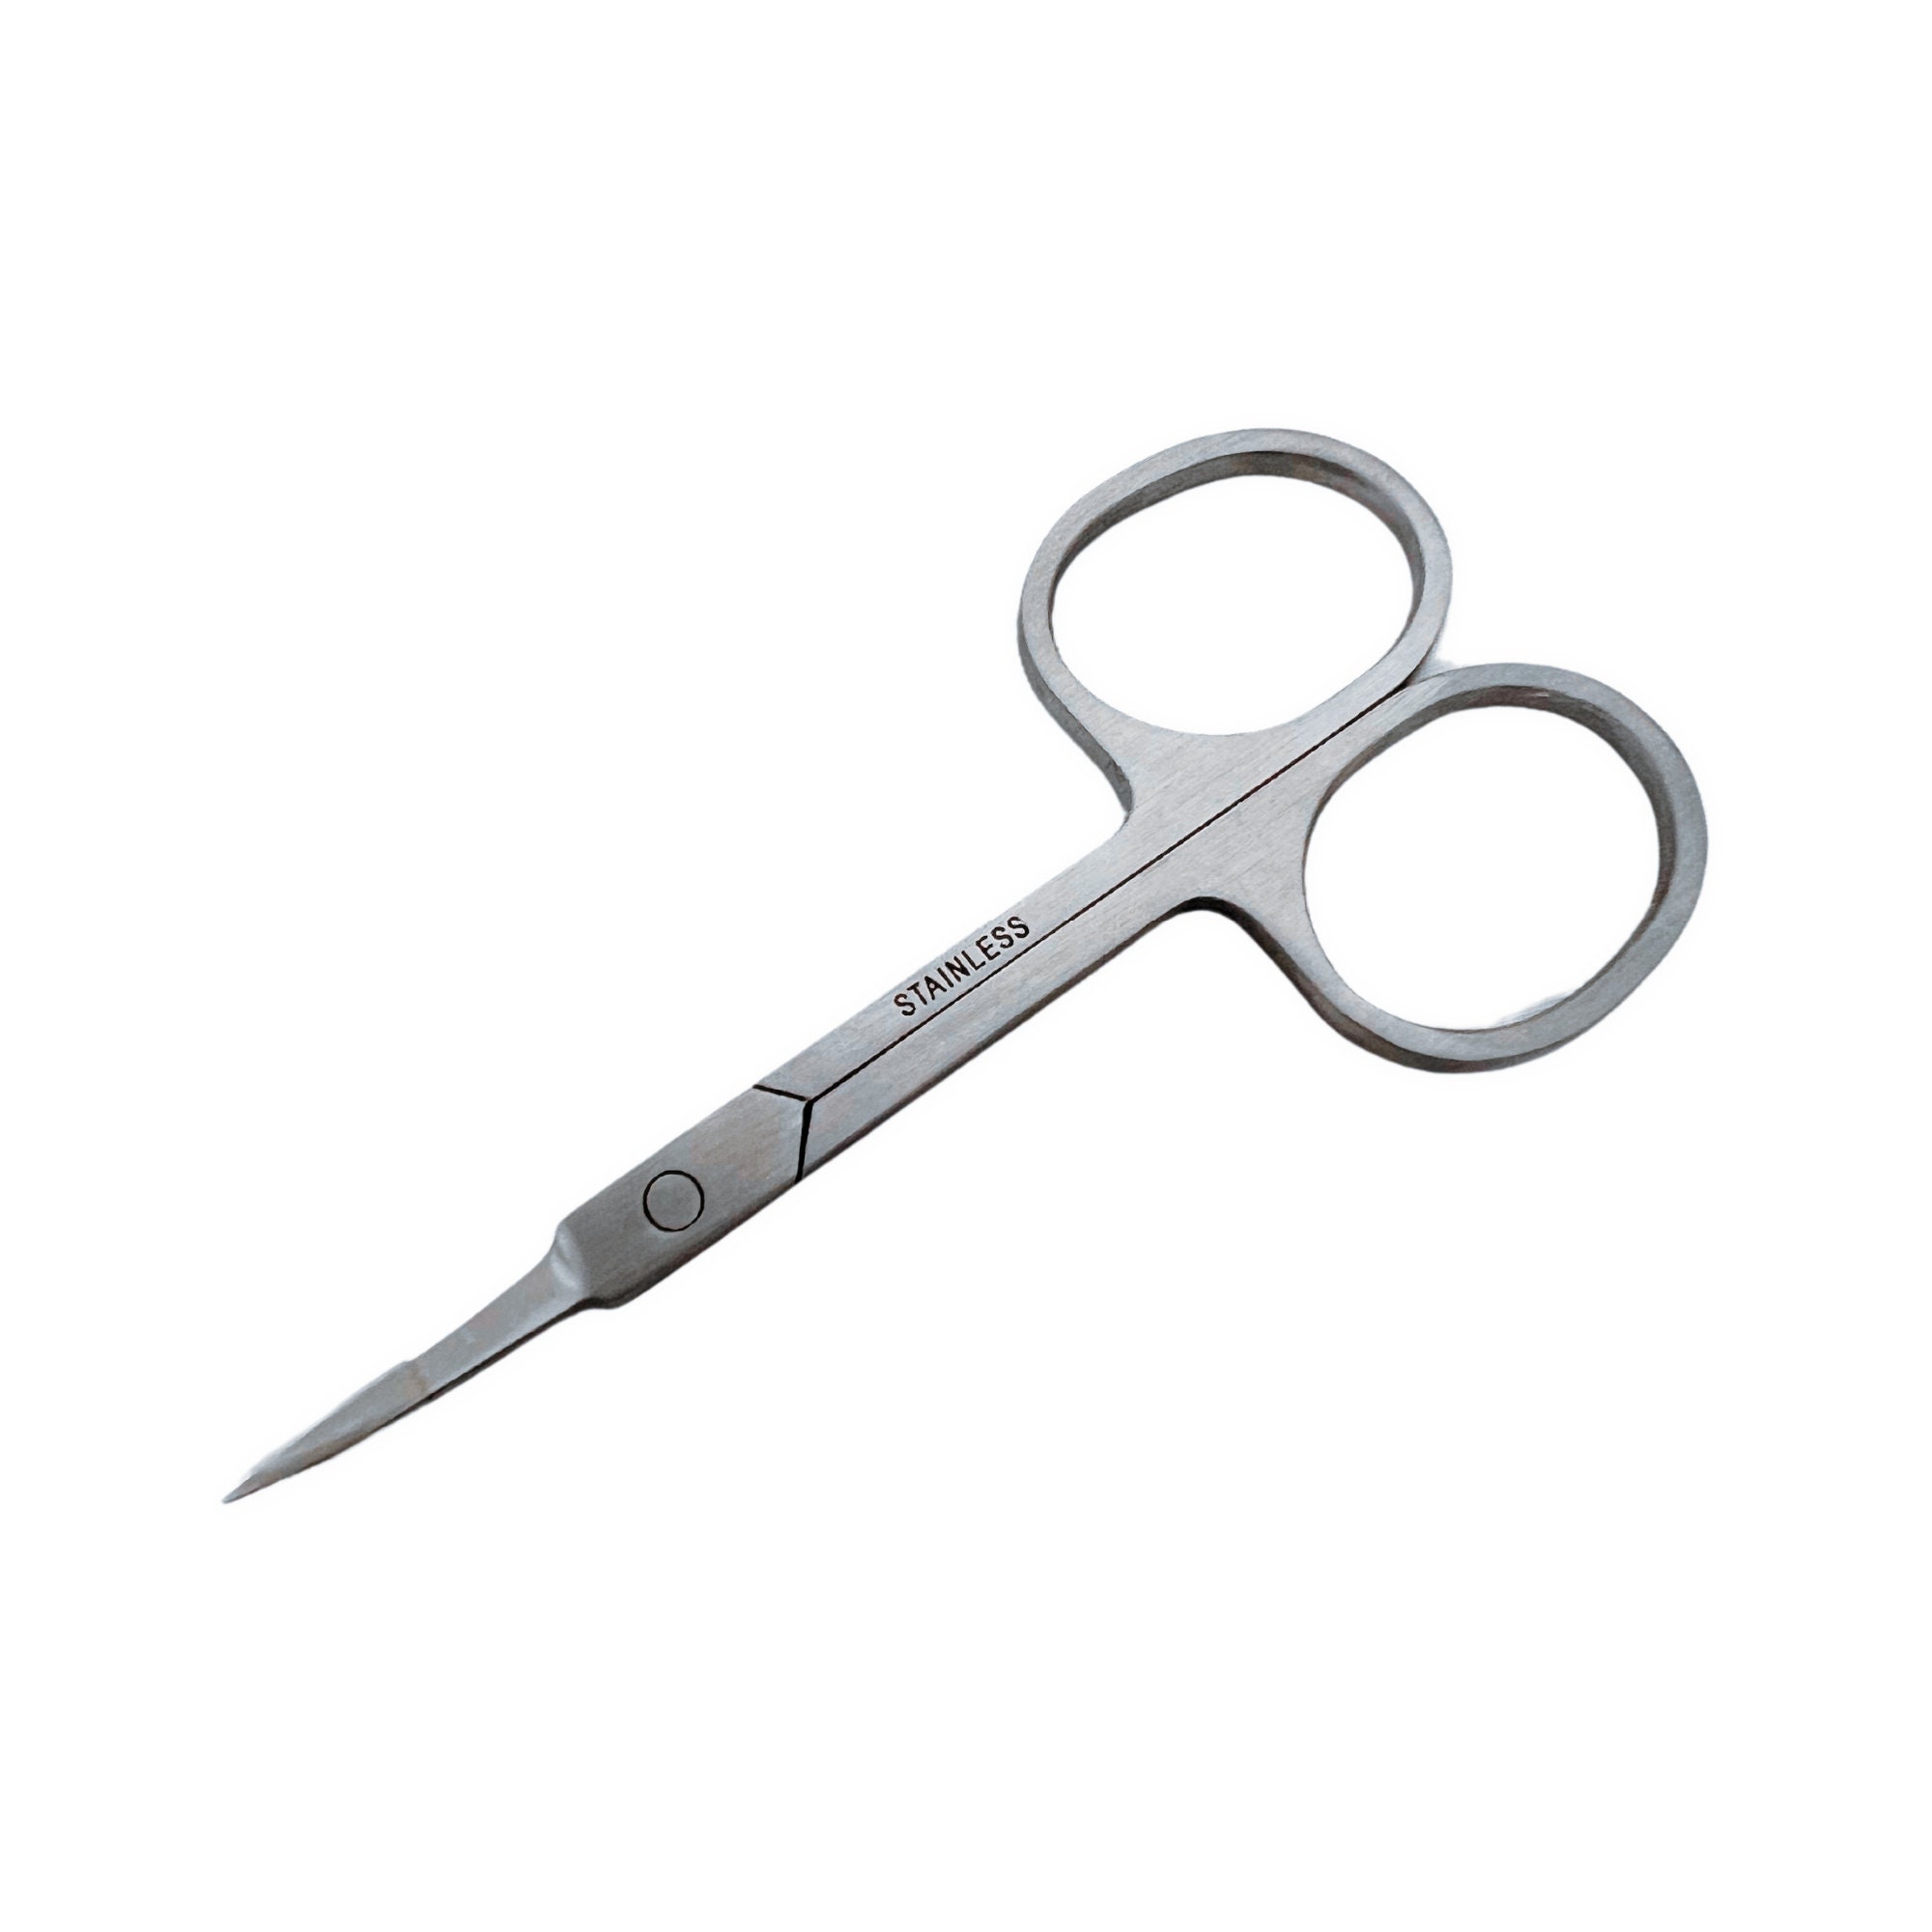 EM Beauty Cuticle Scissors Extra Fine Curved Nail Rust Proof Milti-Purpose  Sharp & Accurate Cut of Fingernails Toenails Grooming Eyebrows Eyelash  Moustache Nose Hairs-With Leather Case